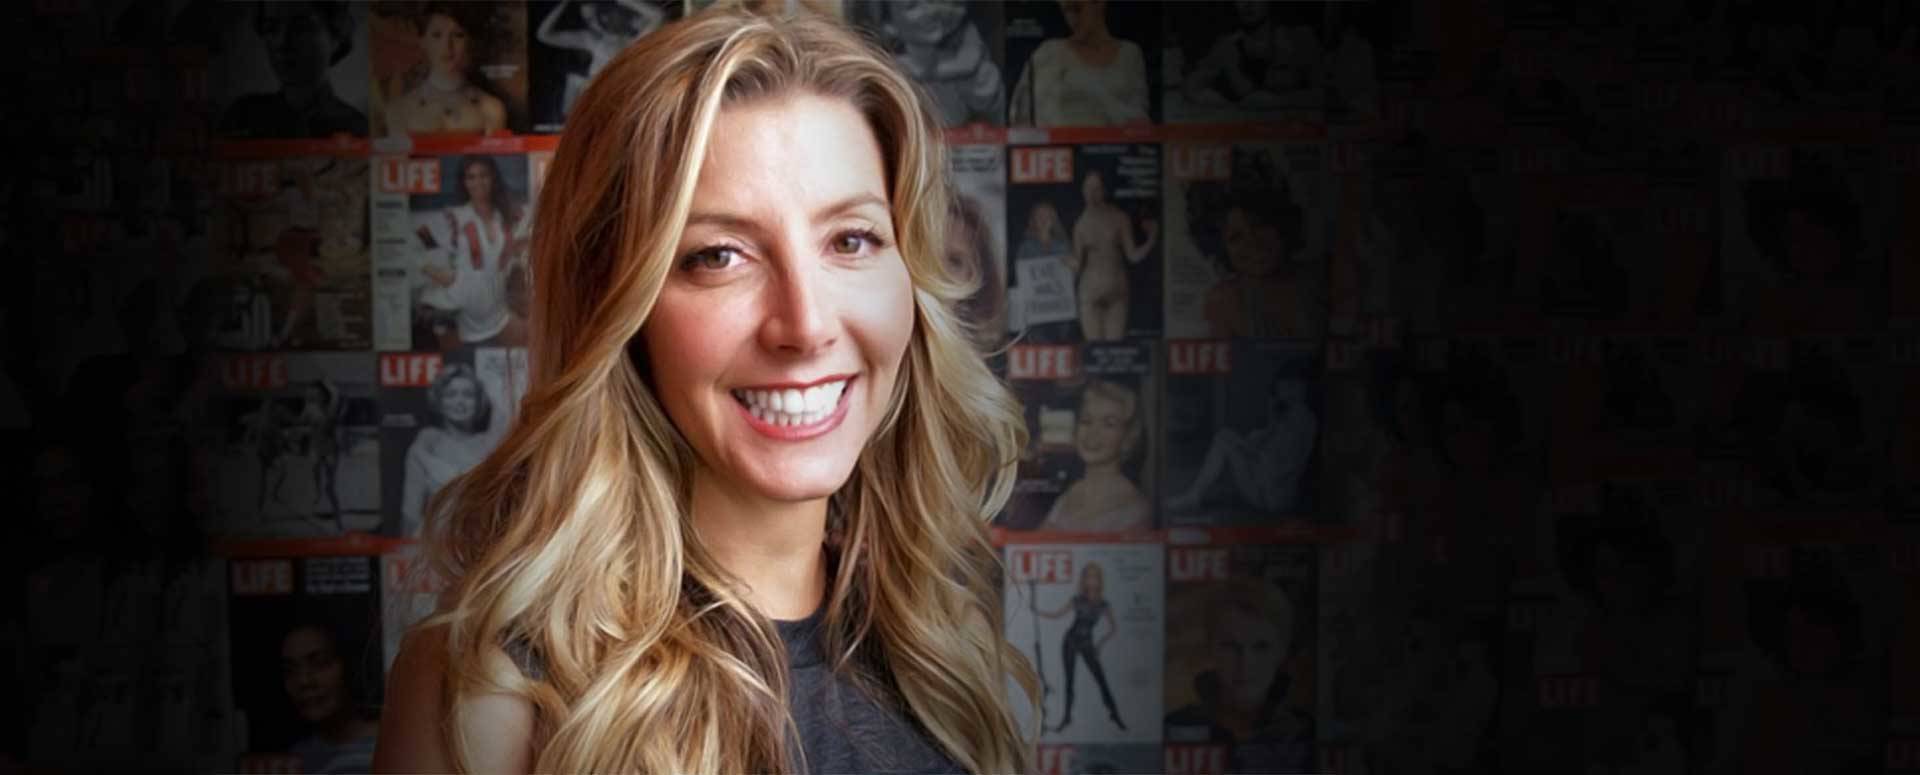 Sara Blakely – Business & Life Lessons From a Self-Made